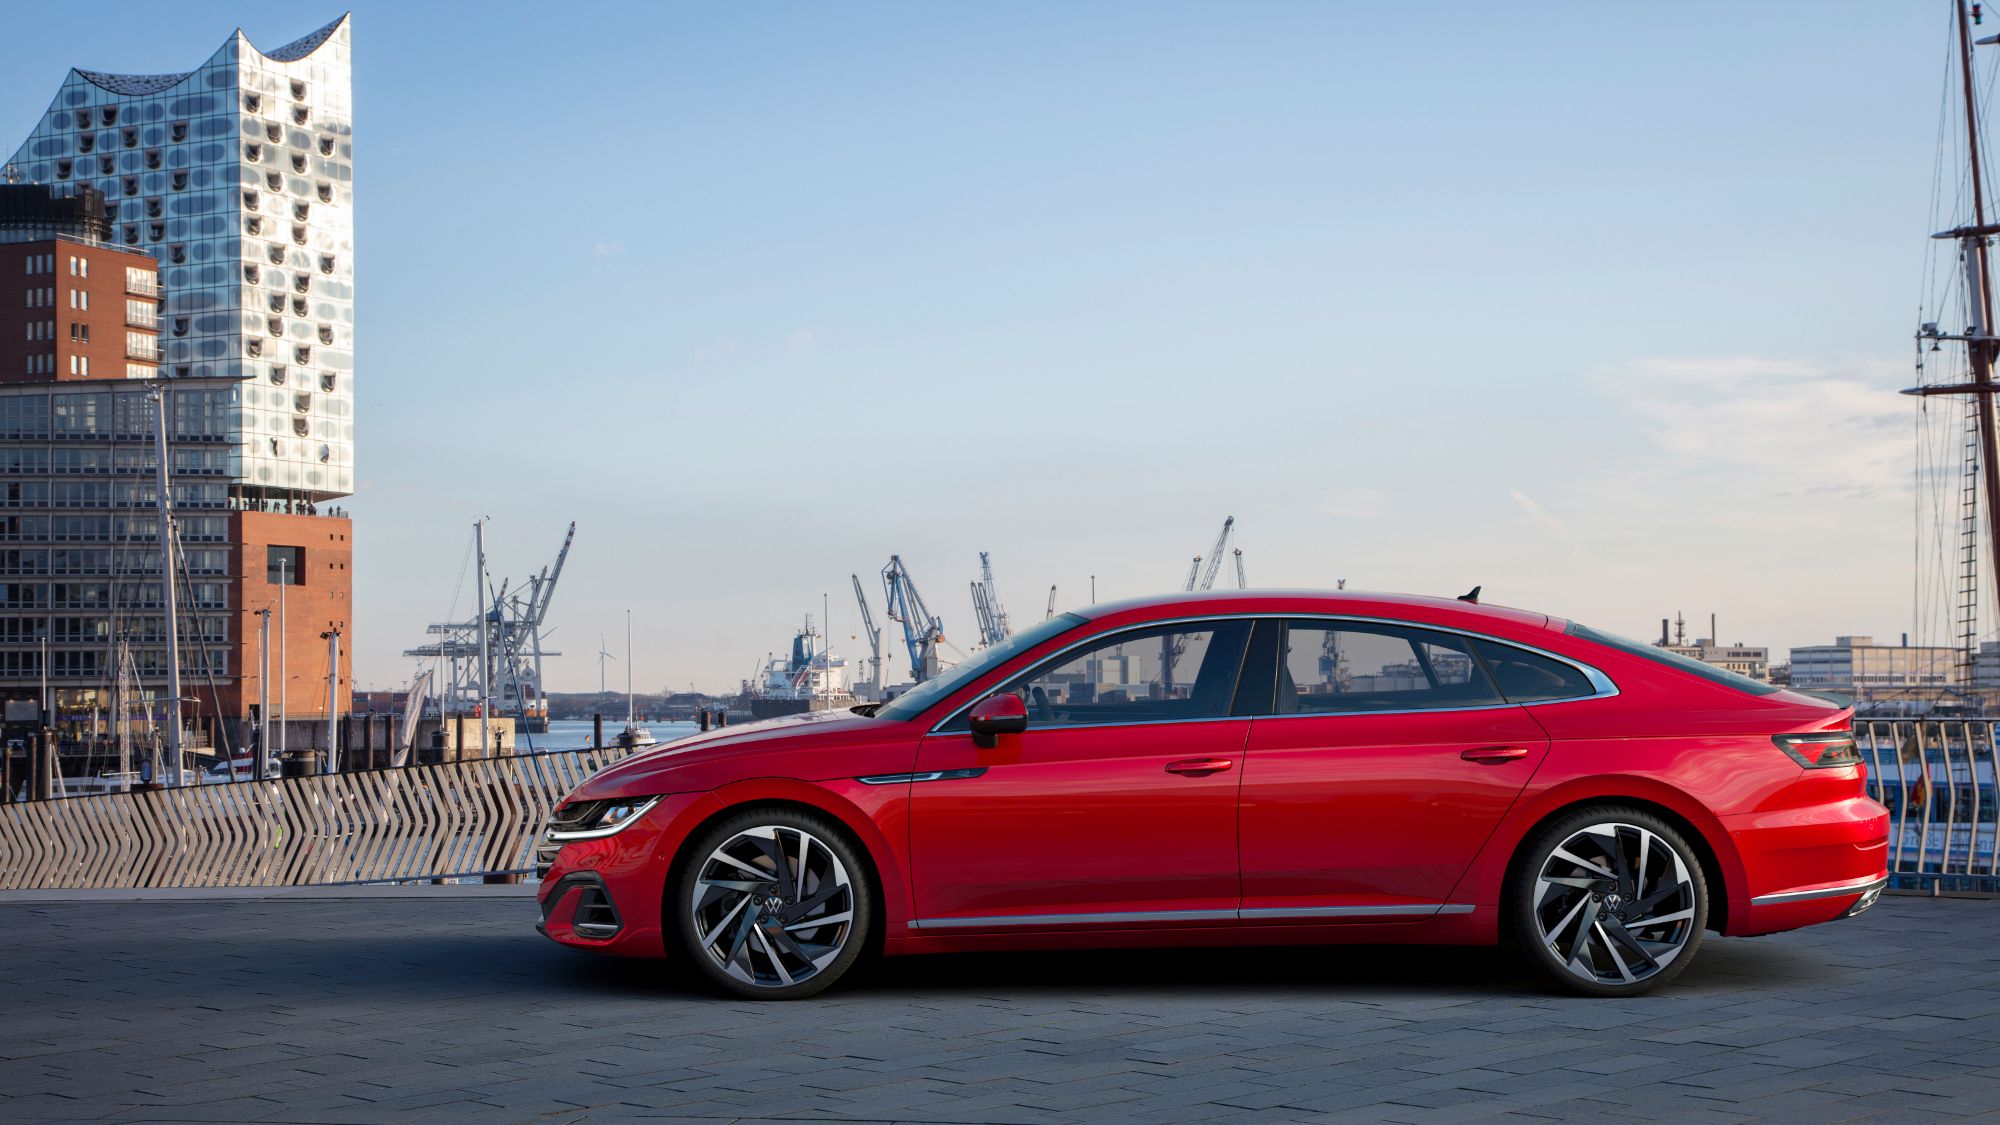 Sideview of a red 2021 Arteon.